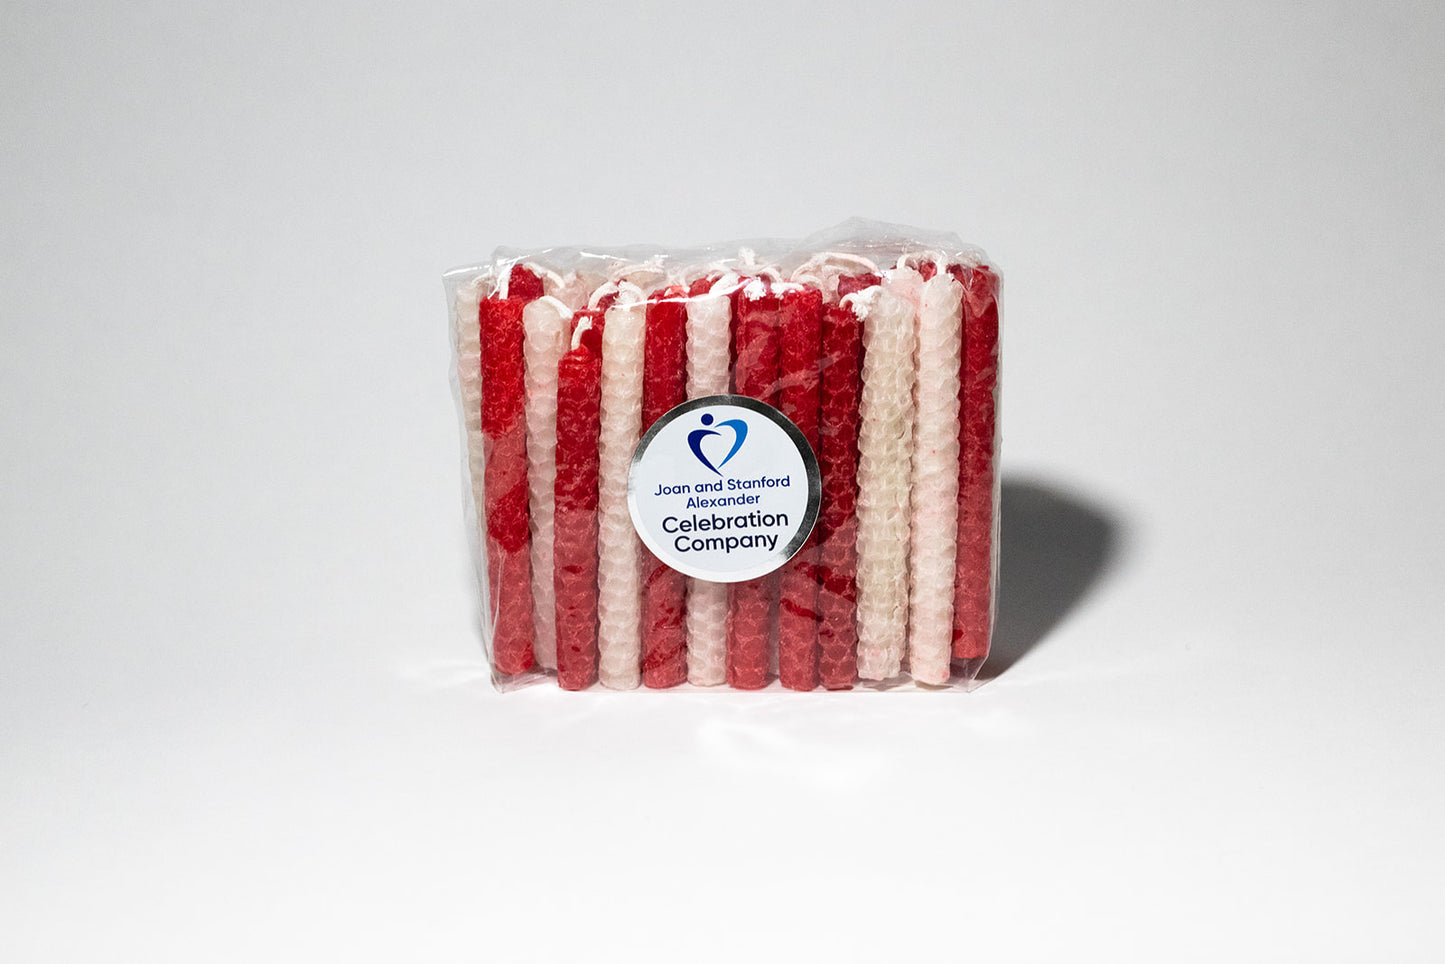 Packages of 44 Chanukah candles in red and white